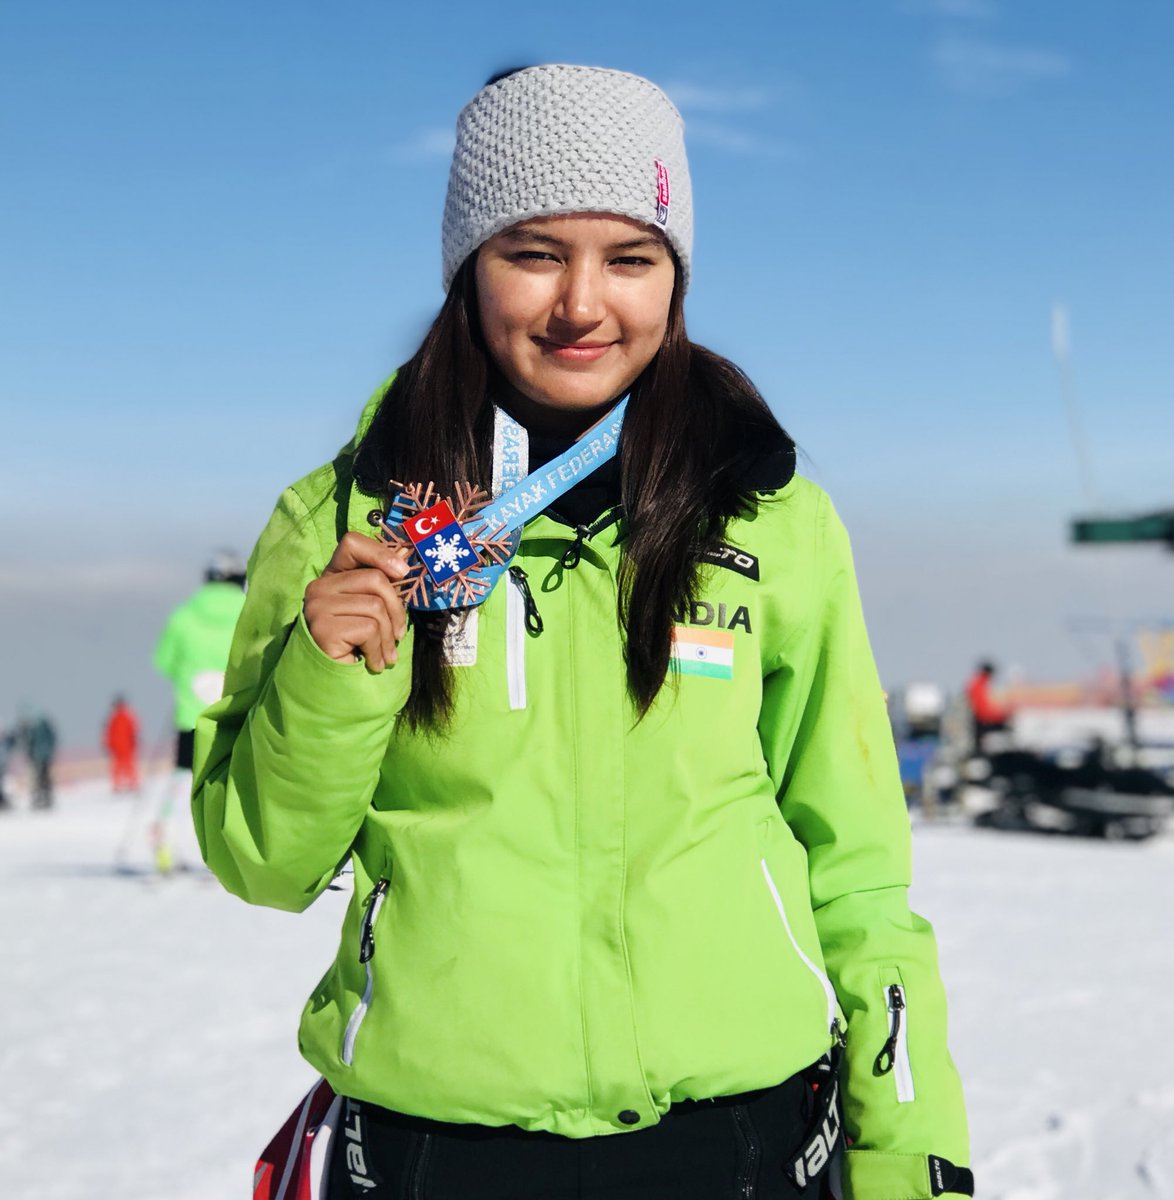 Aanchal Thakur becomes first Indian to win inter,national medal in skiing